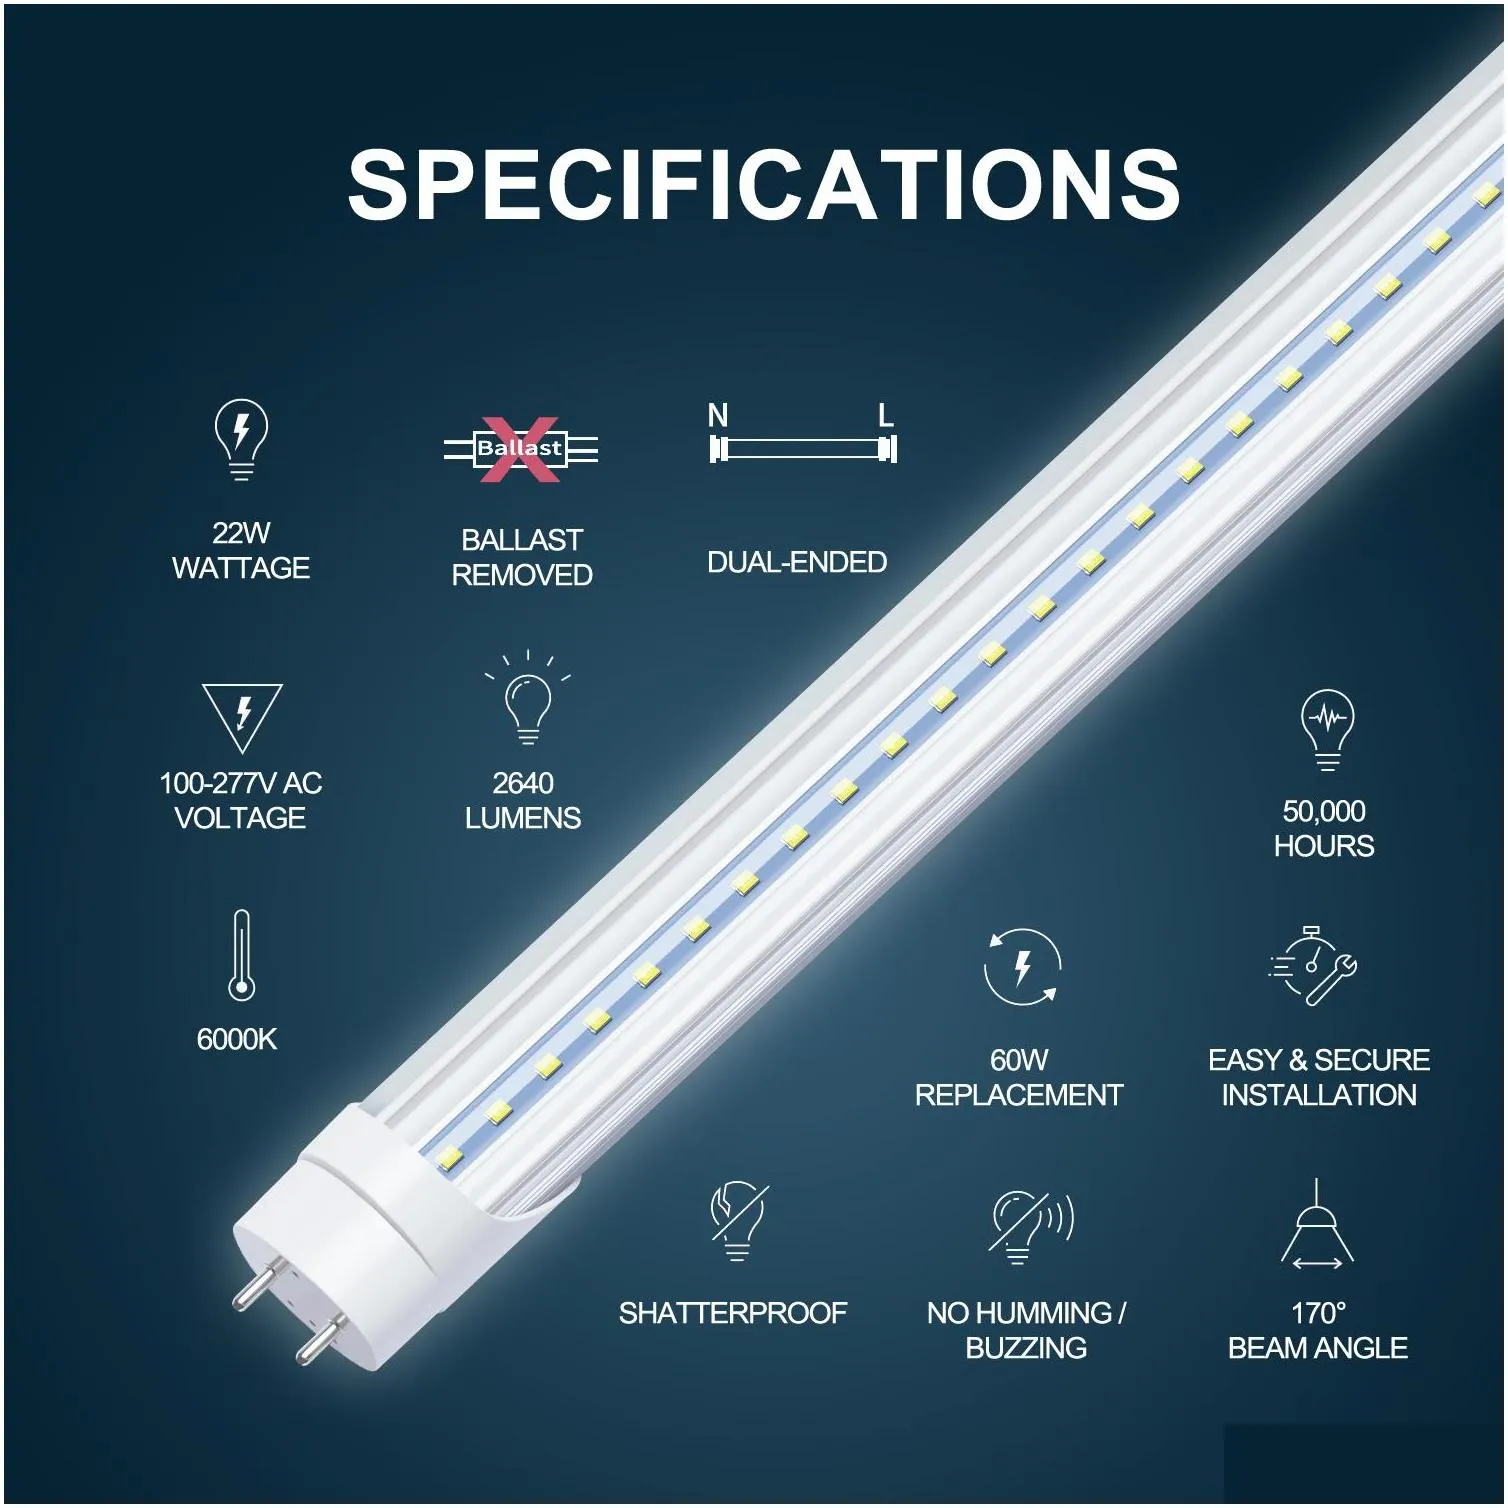 4ft t8 led tube light bulbs 18w 22w 28w 4 foot t12 replacement for flourescent fixtures clear / frosted double ended power bypass ballast garage warehouse shop